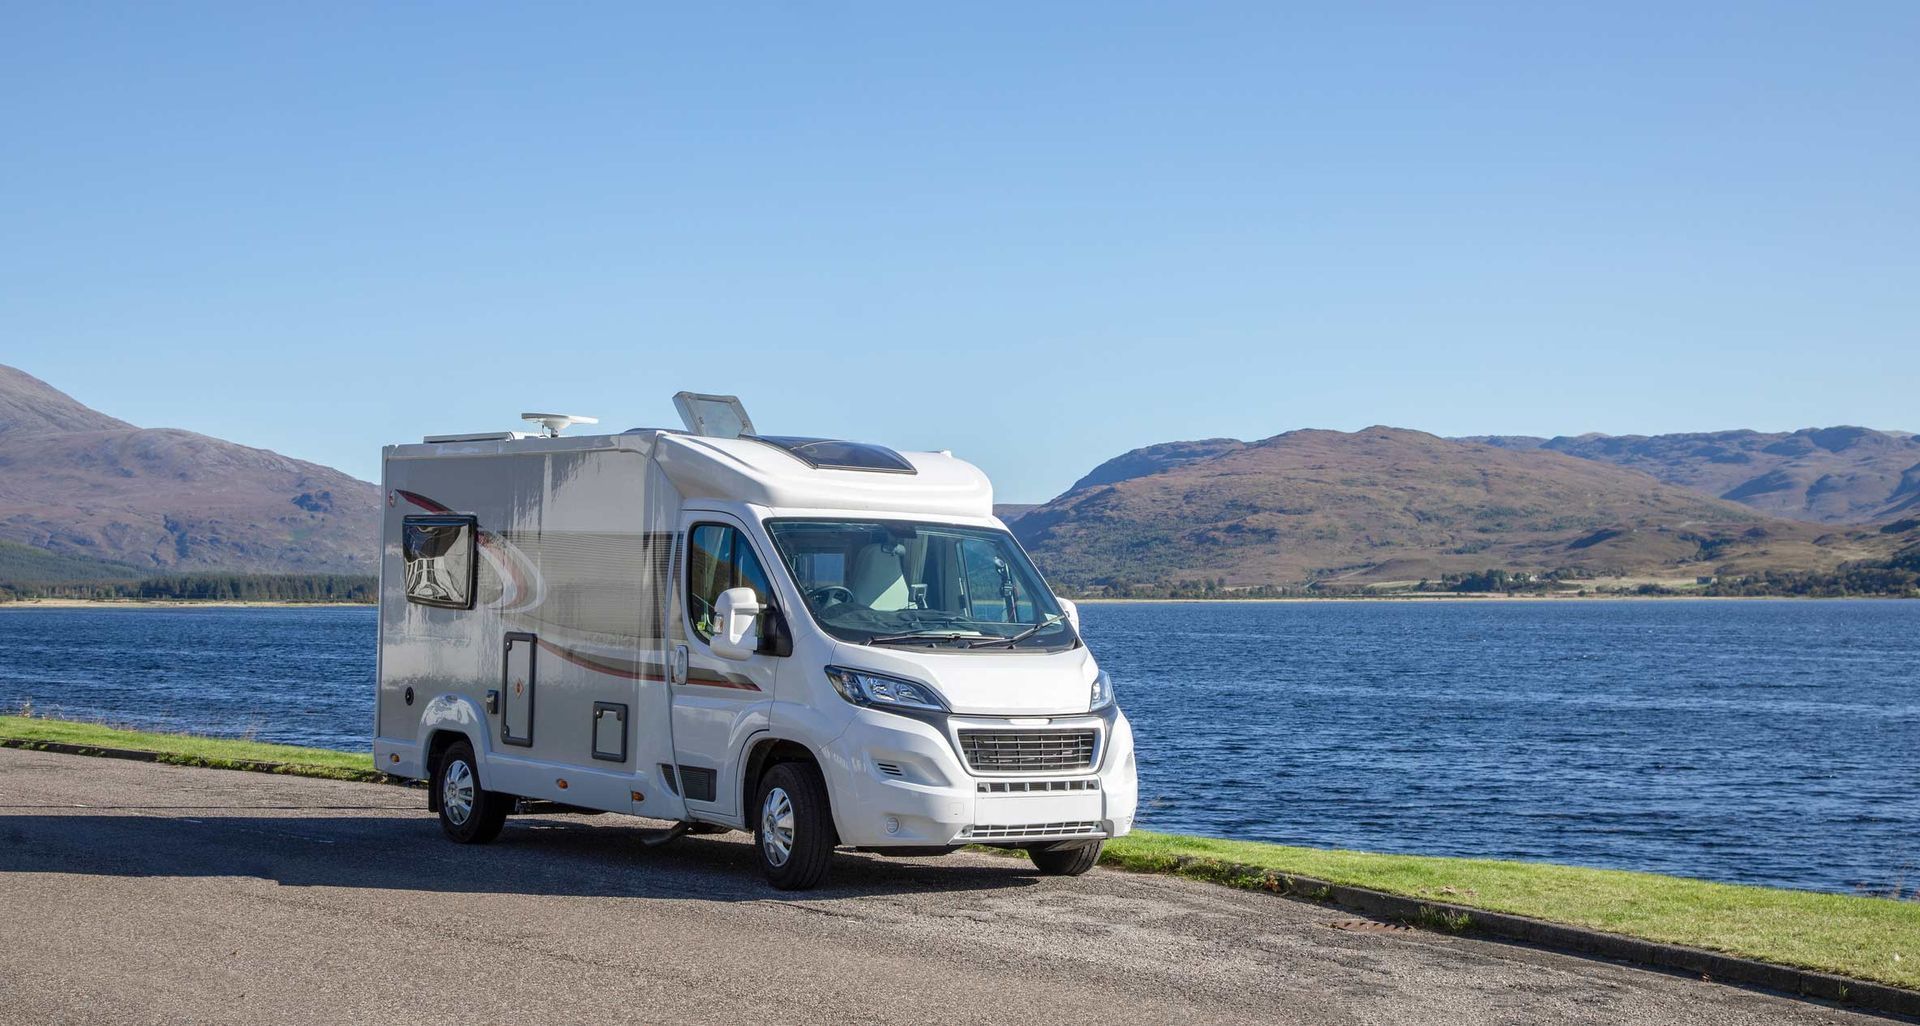 A white RV is parked next to a lake with mountains in the background